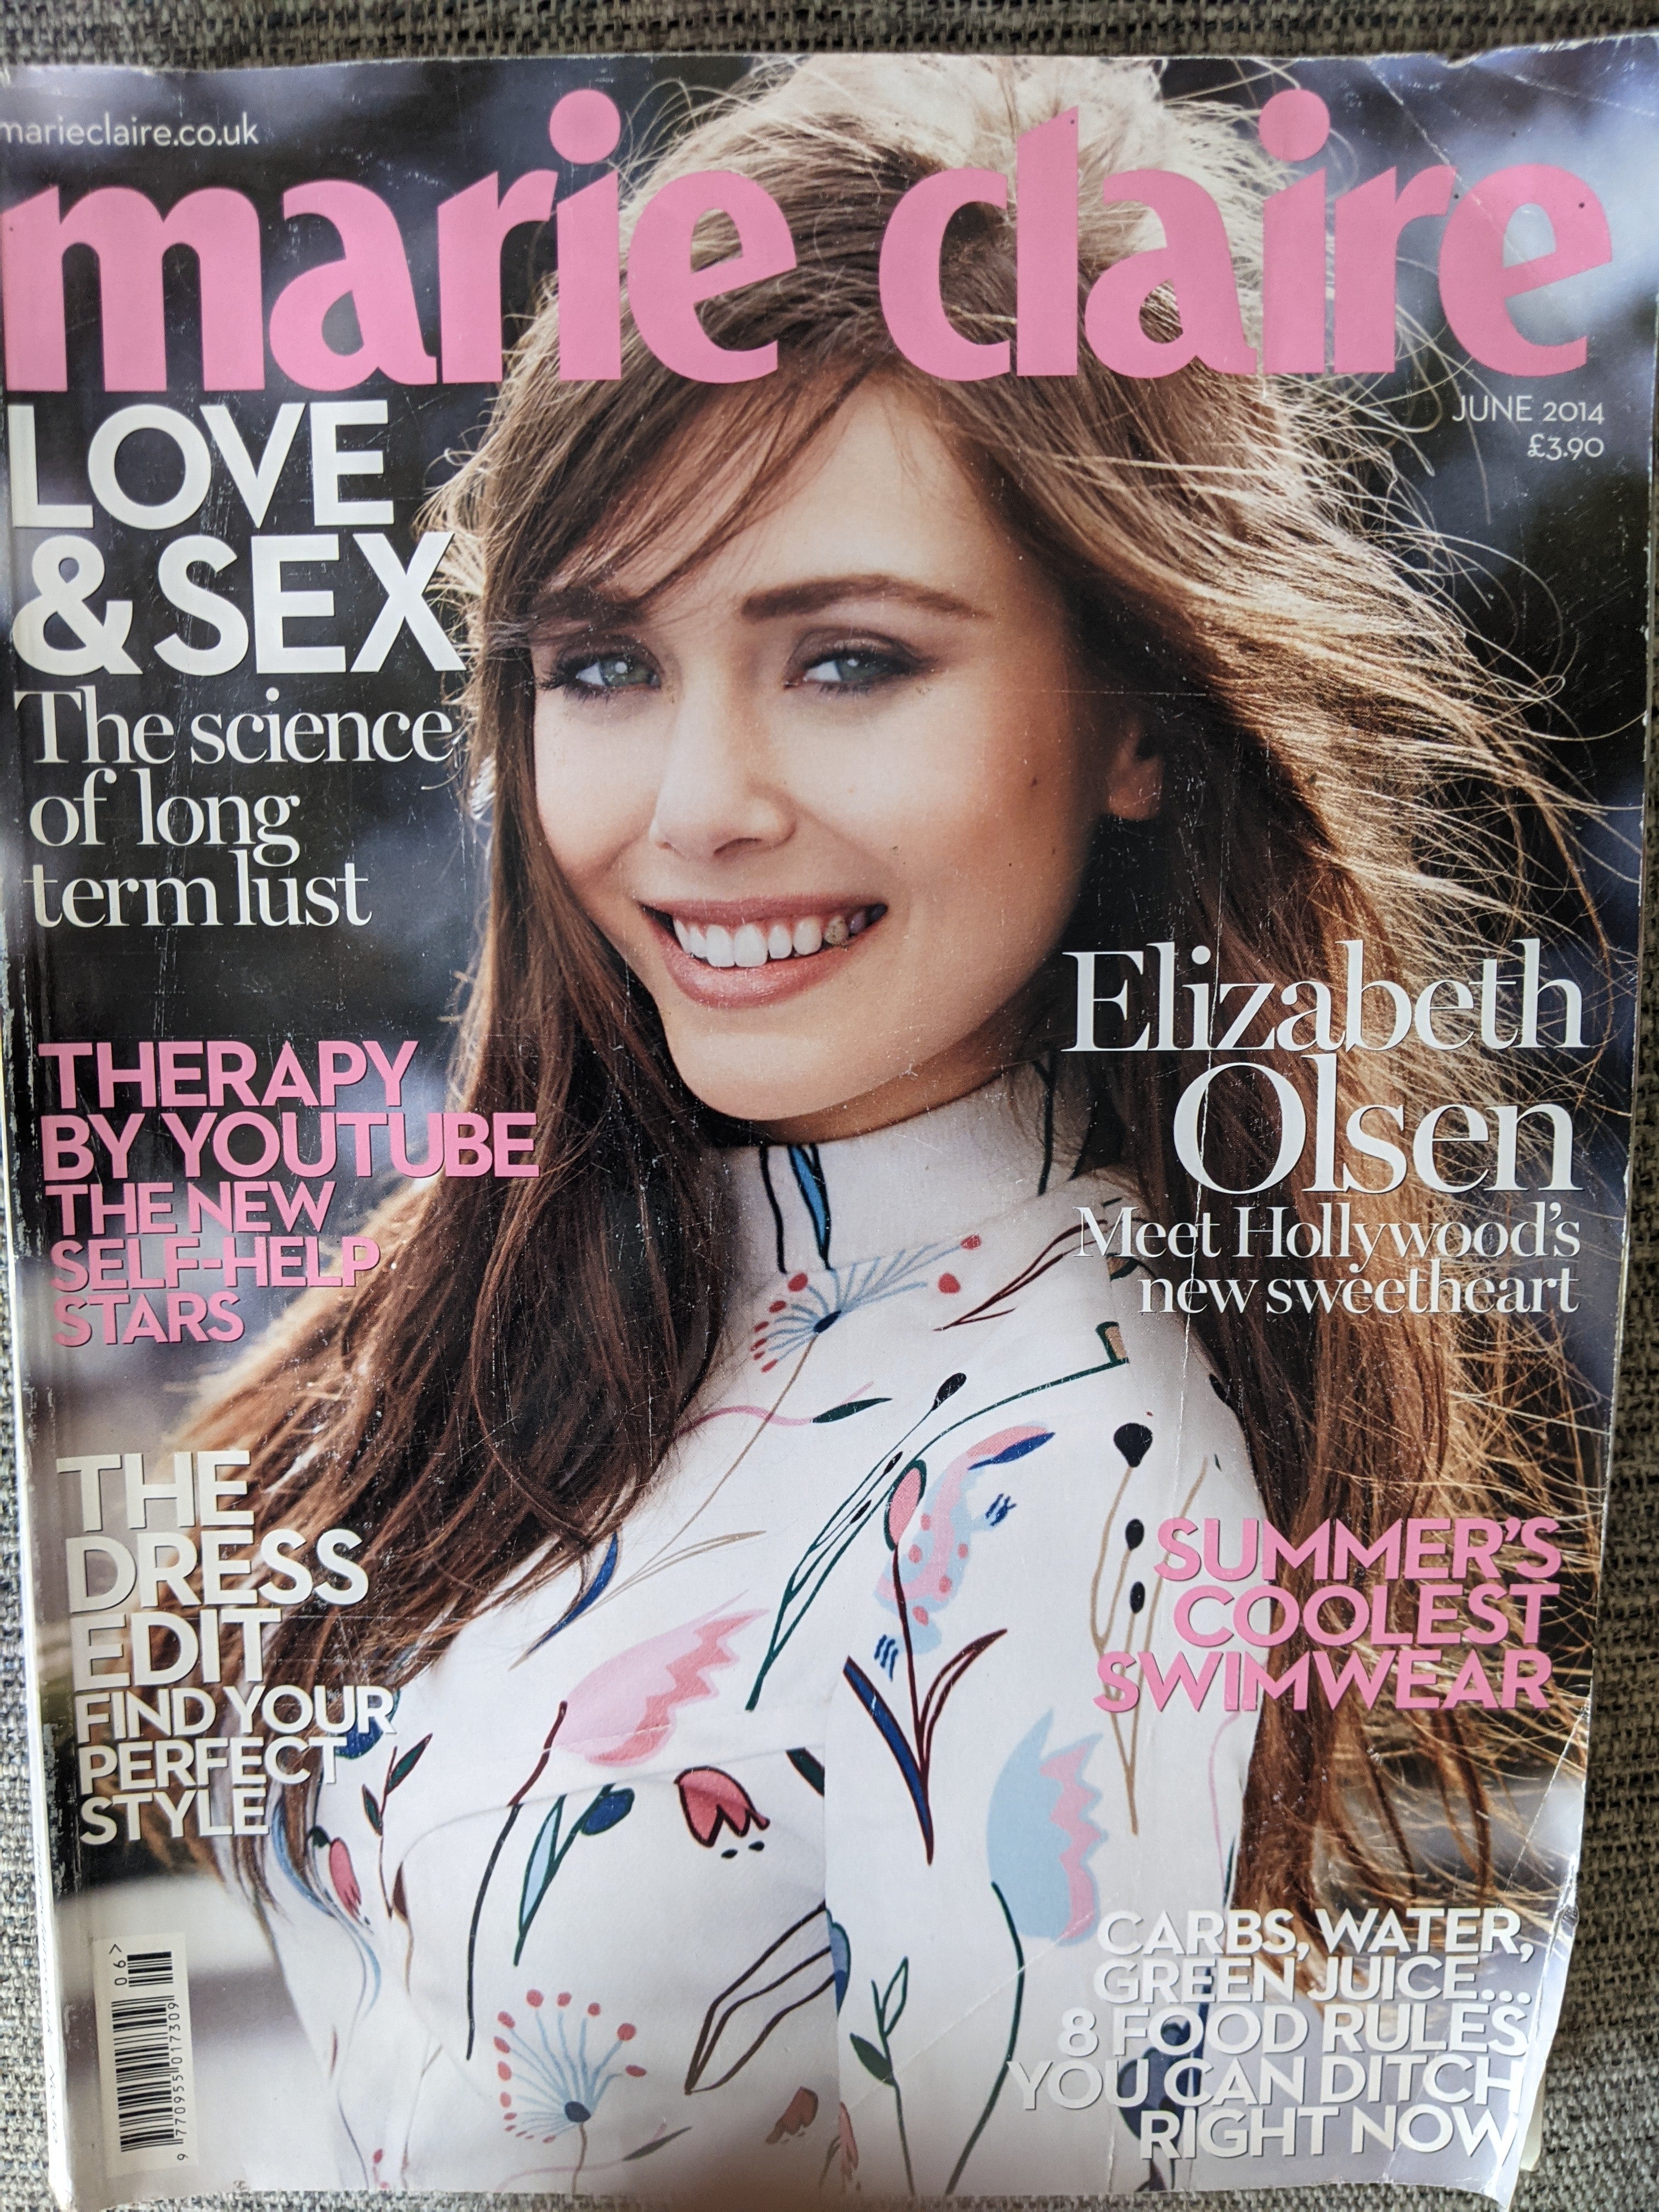 Marie Claire UK rounds up favourite looks in their first digital